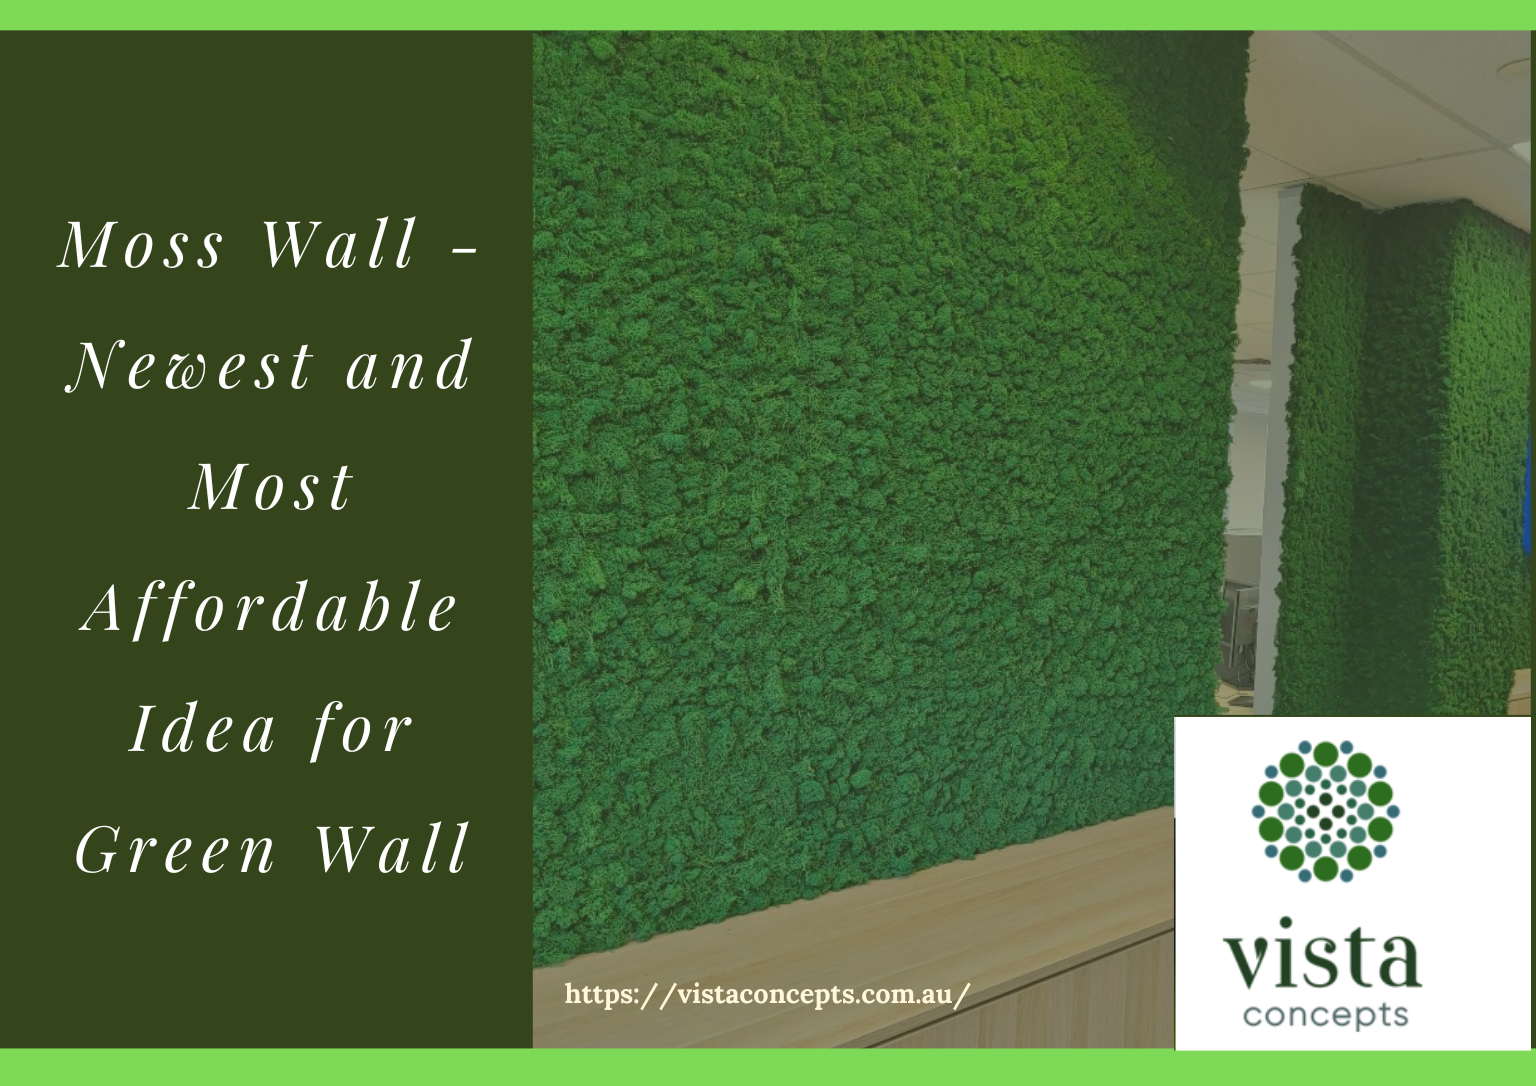 Moss Wall - Newest And Most Affordable Idea For Green Wall